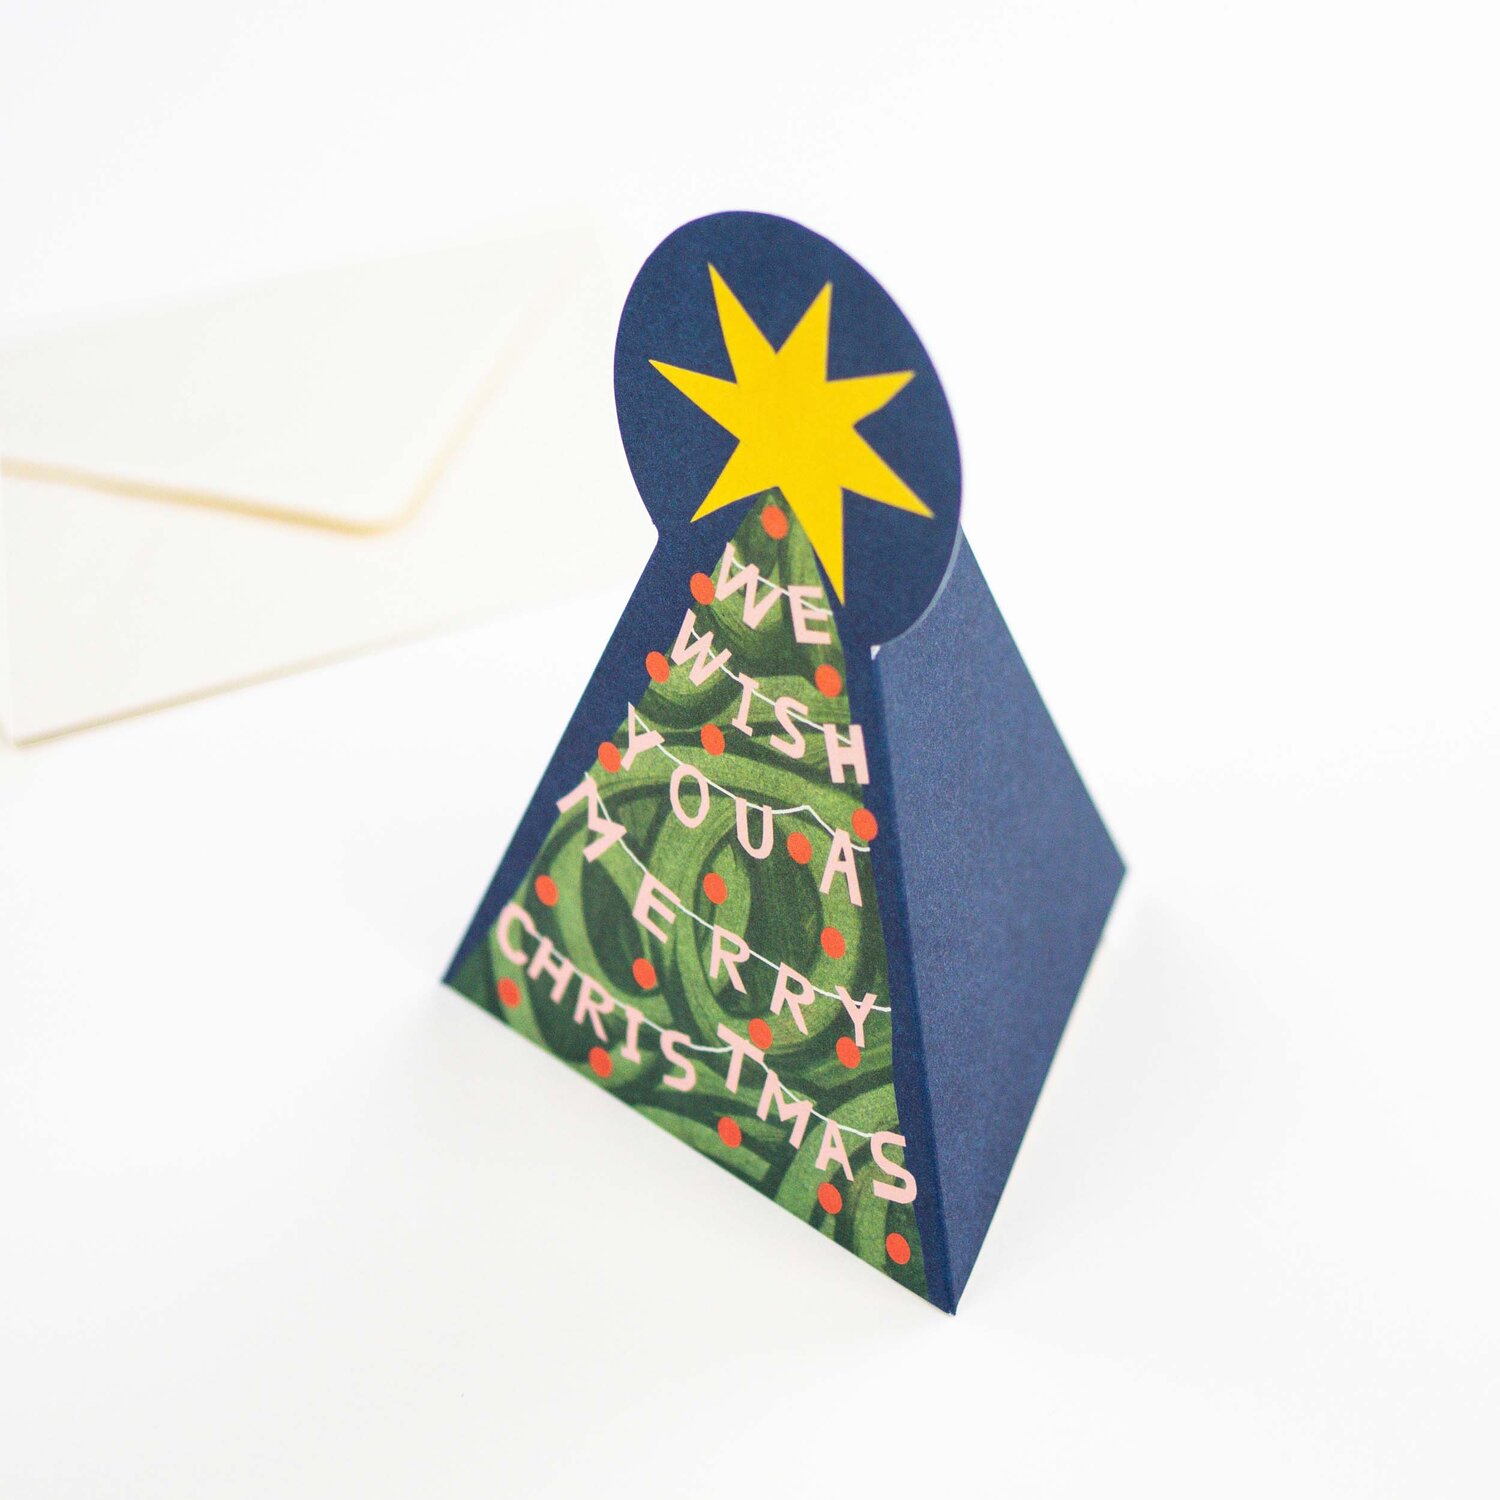 A Merry Christmas Tree standing card by Hadley Paper Goods